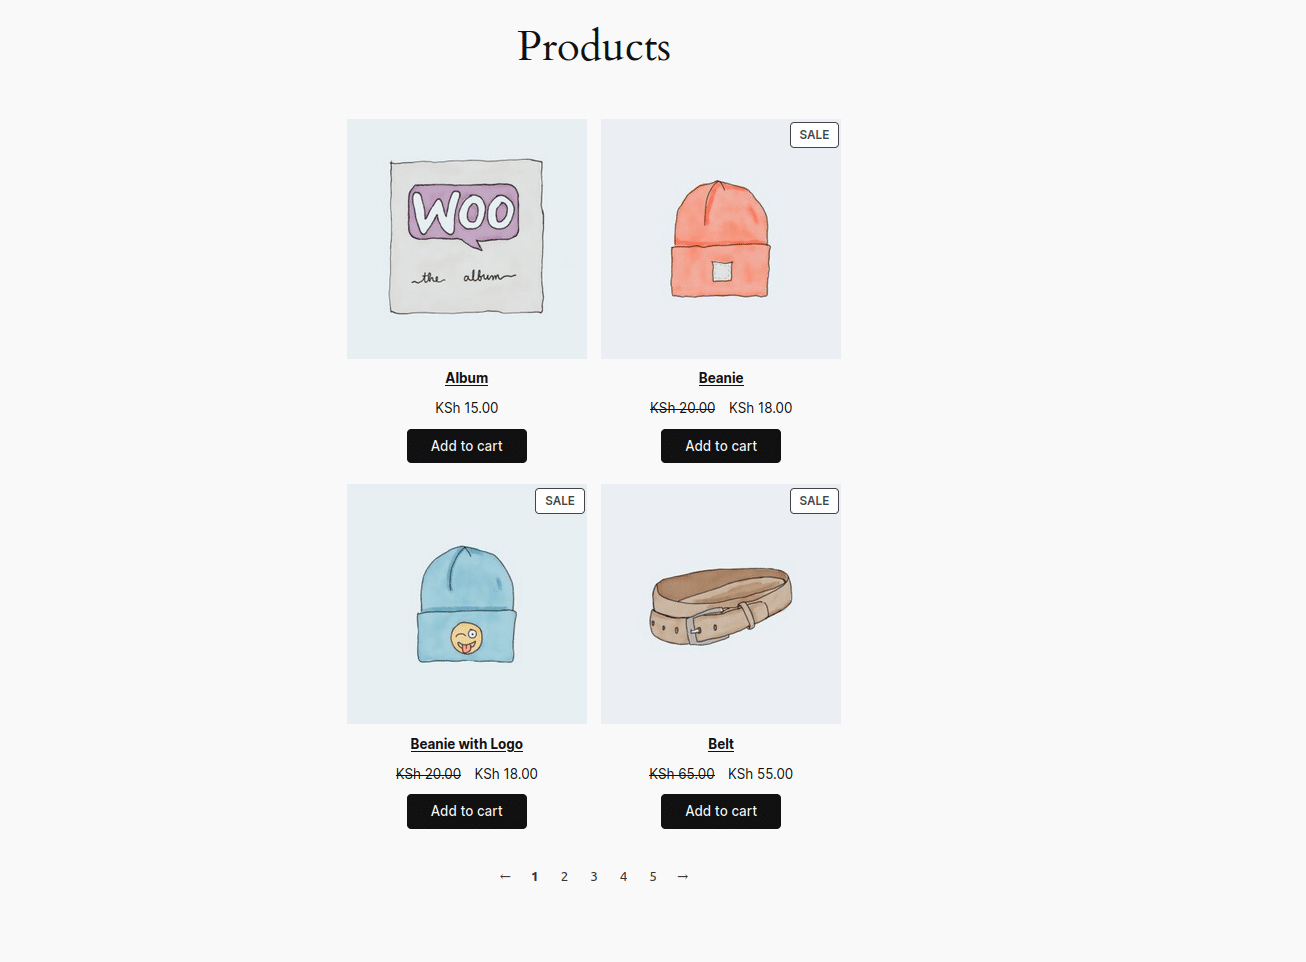 Updated Products page displays products in a 2-by-2 grid and reflects a navigation bar